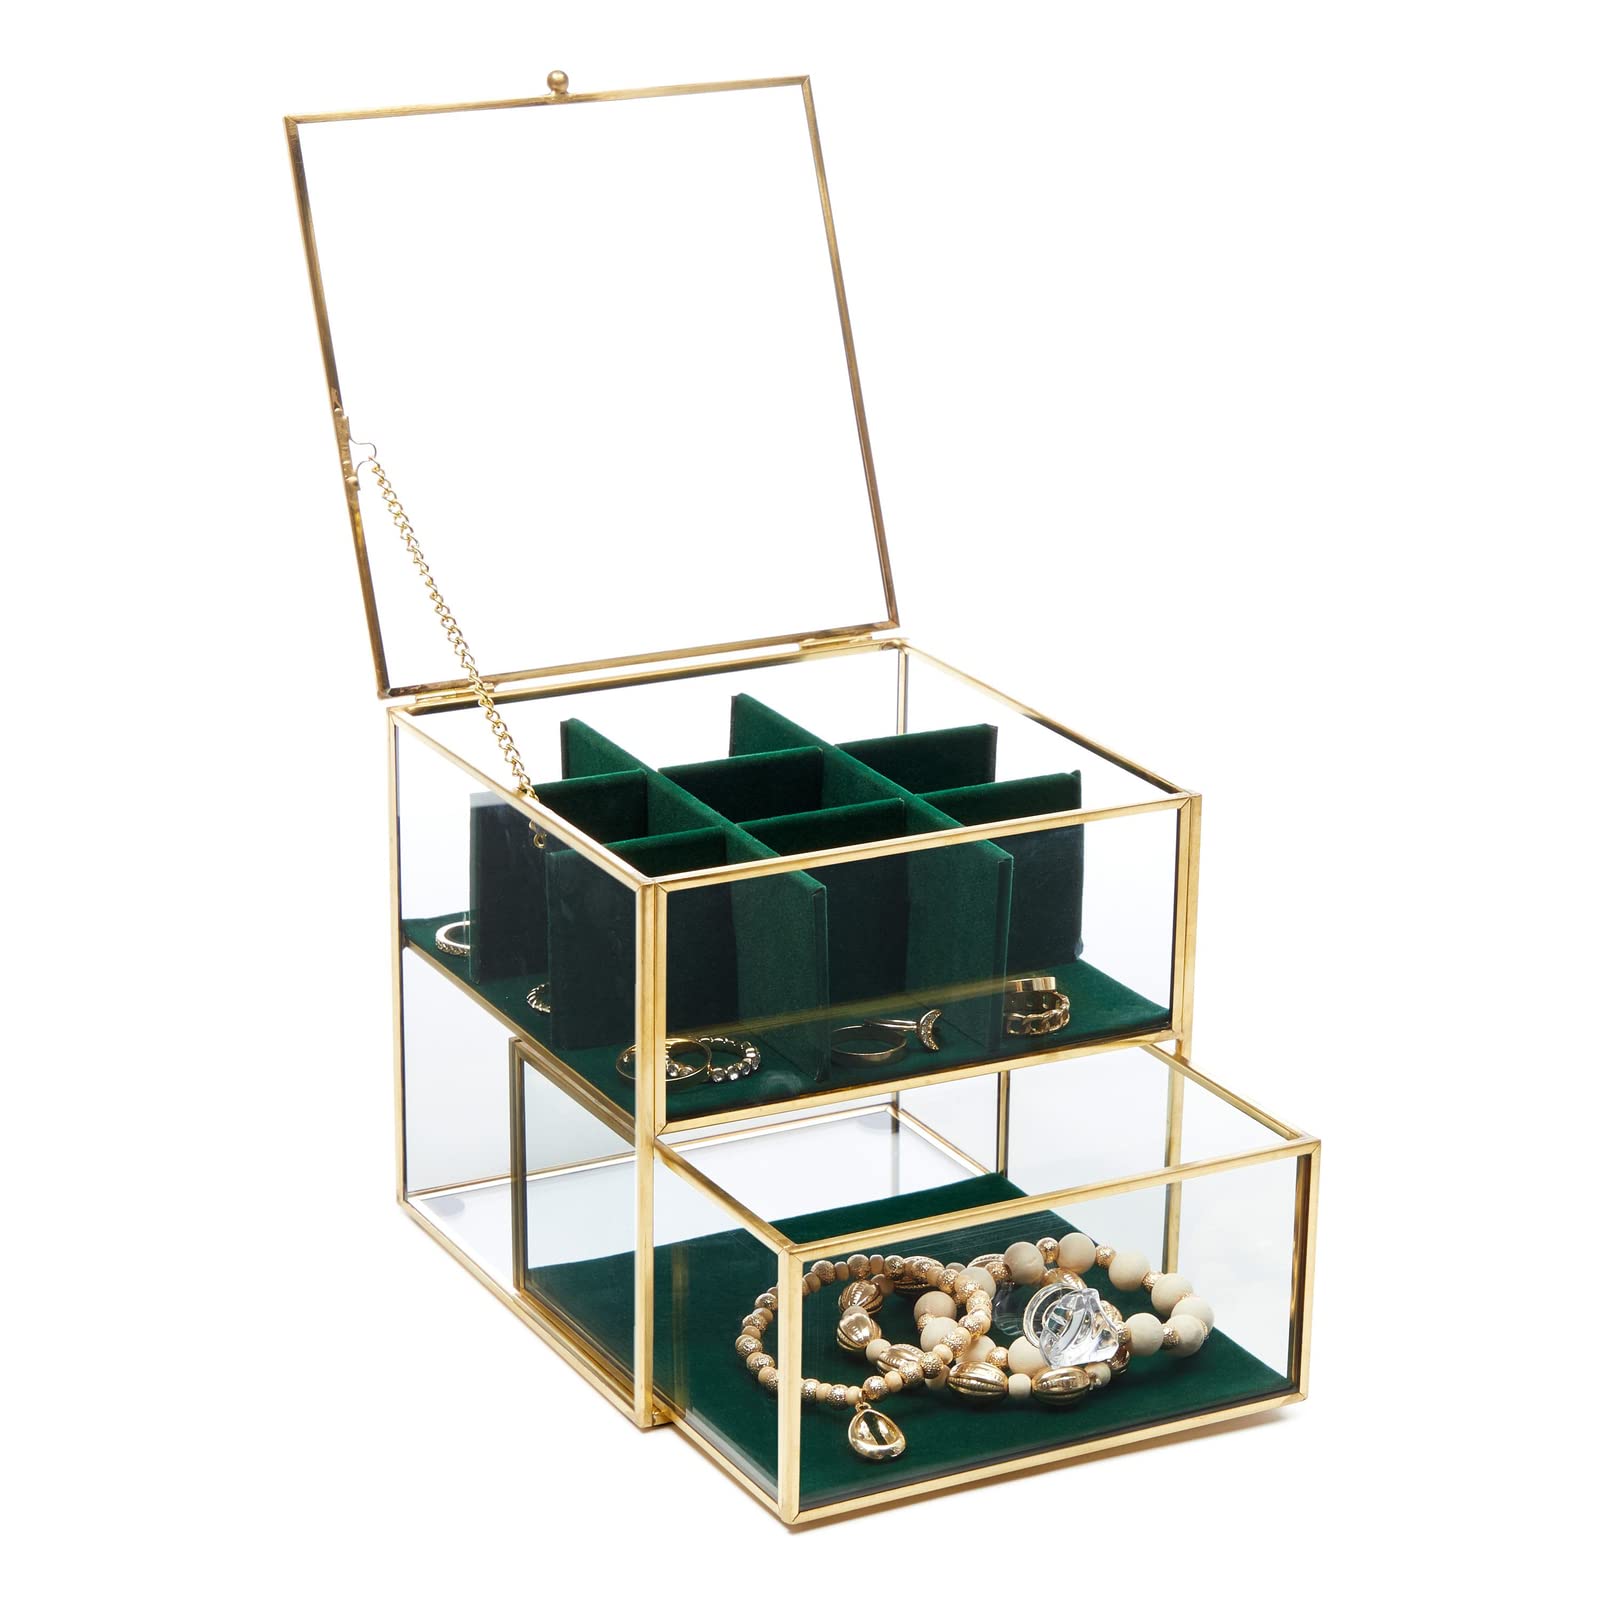 Clear Glass Jewellery Box with Drawers and Green Velvet Compartments, Gold Display Case, 14 x 15.5 cm